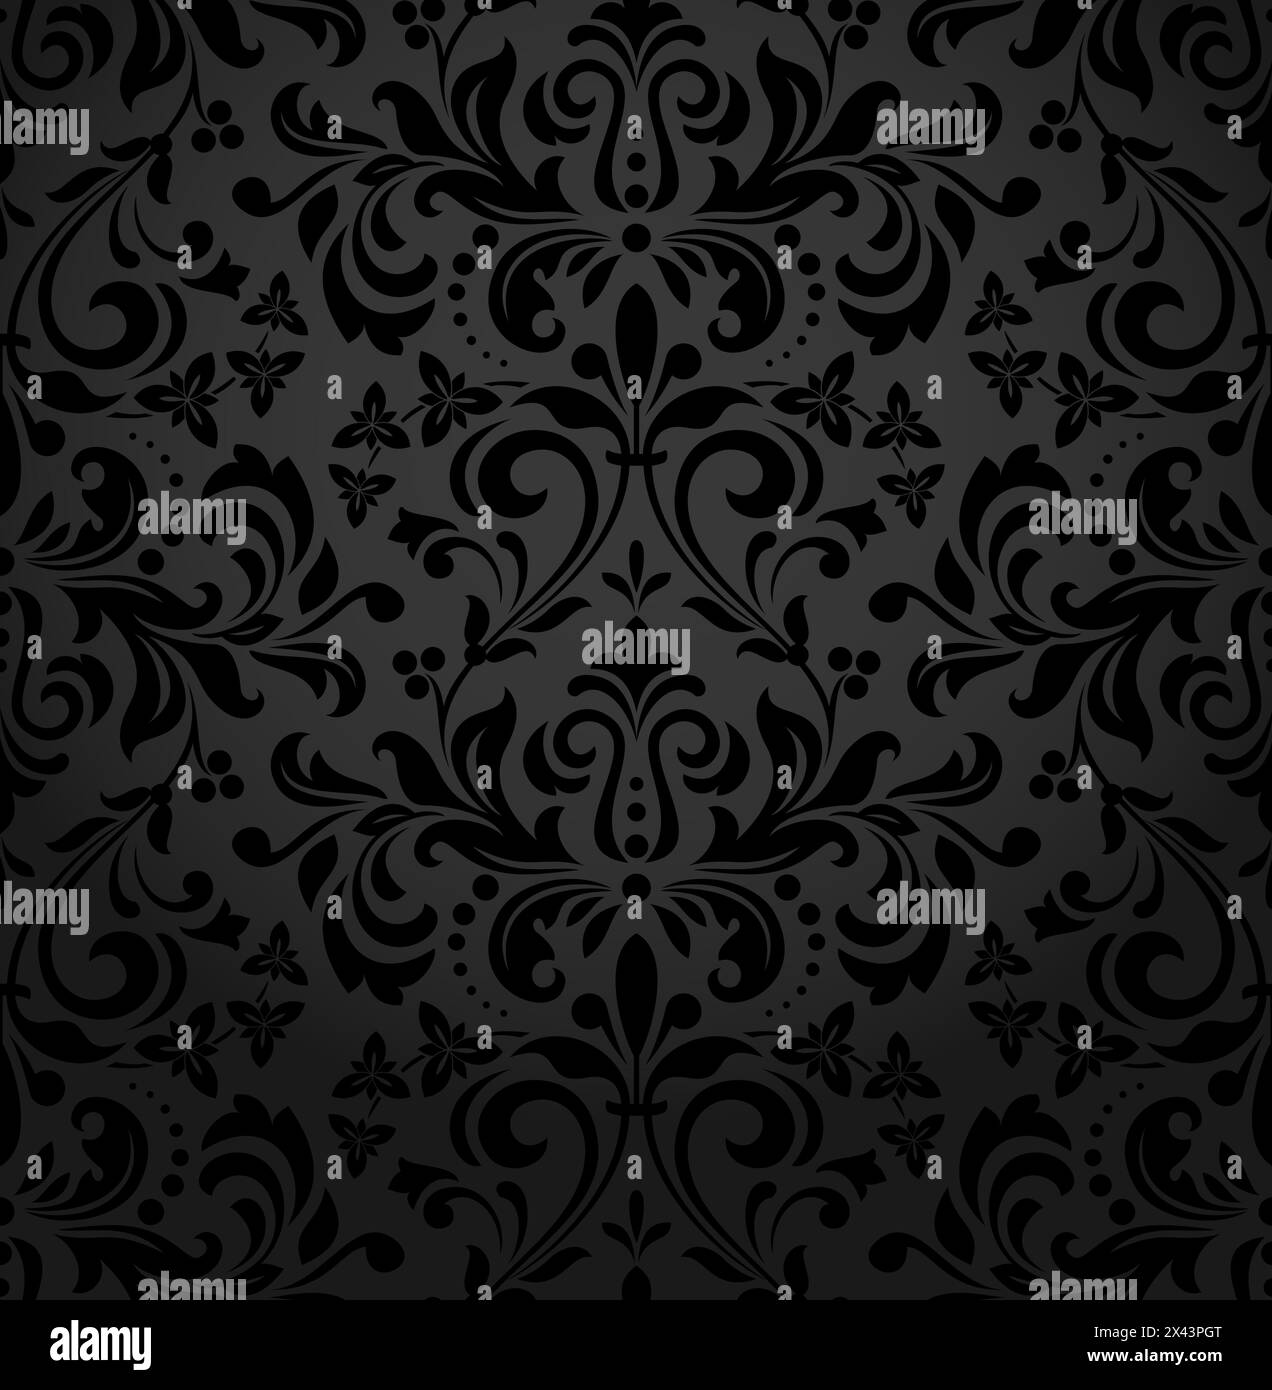 Floral pattern. Wallpaper baroque, damask. Seamless vector background. Black ornament Stock Vector